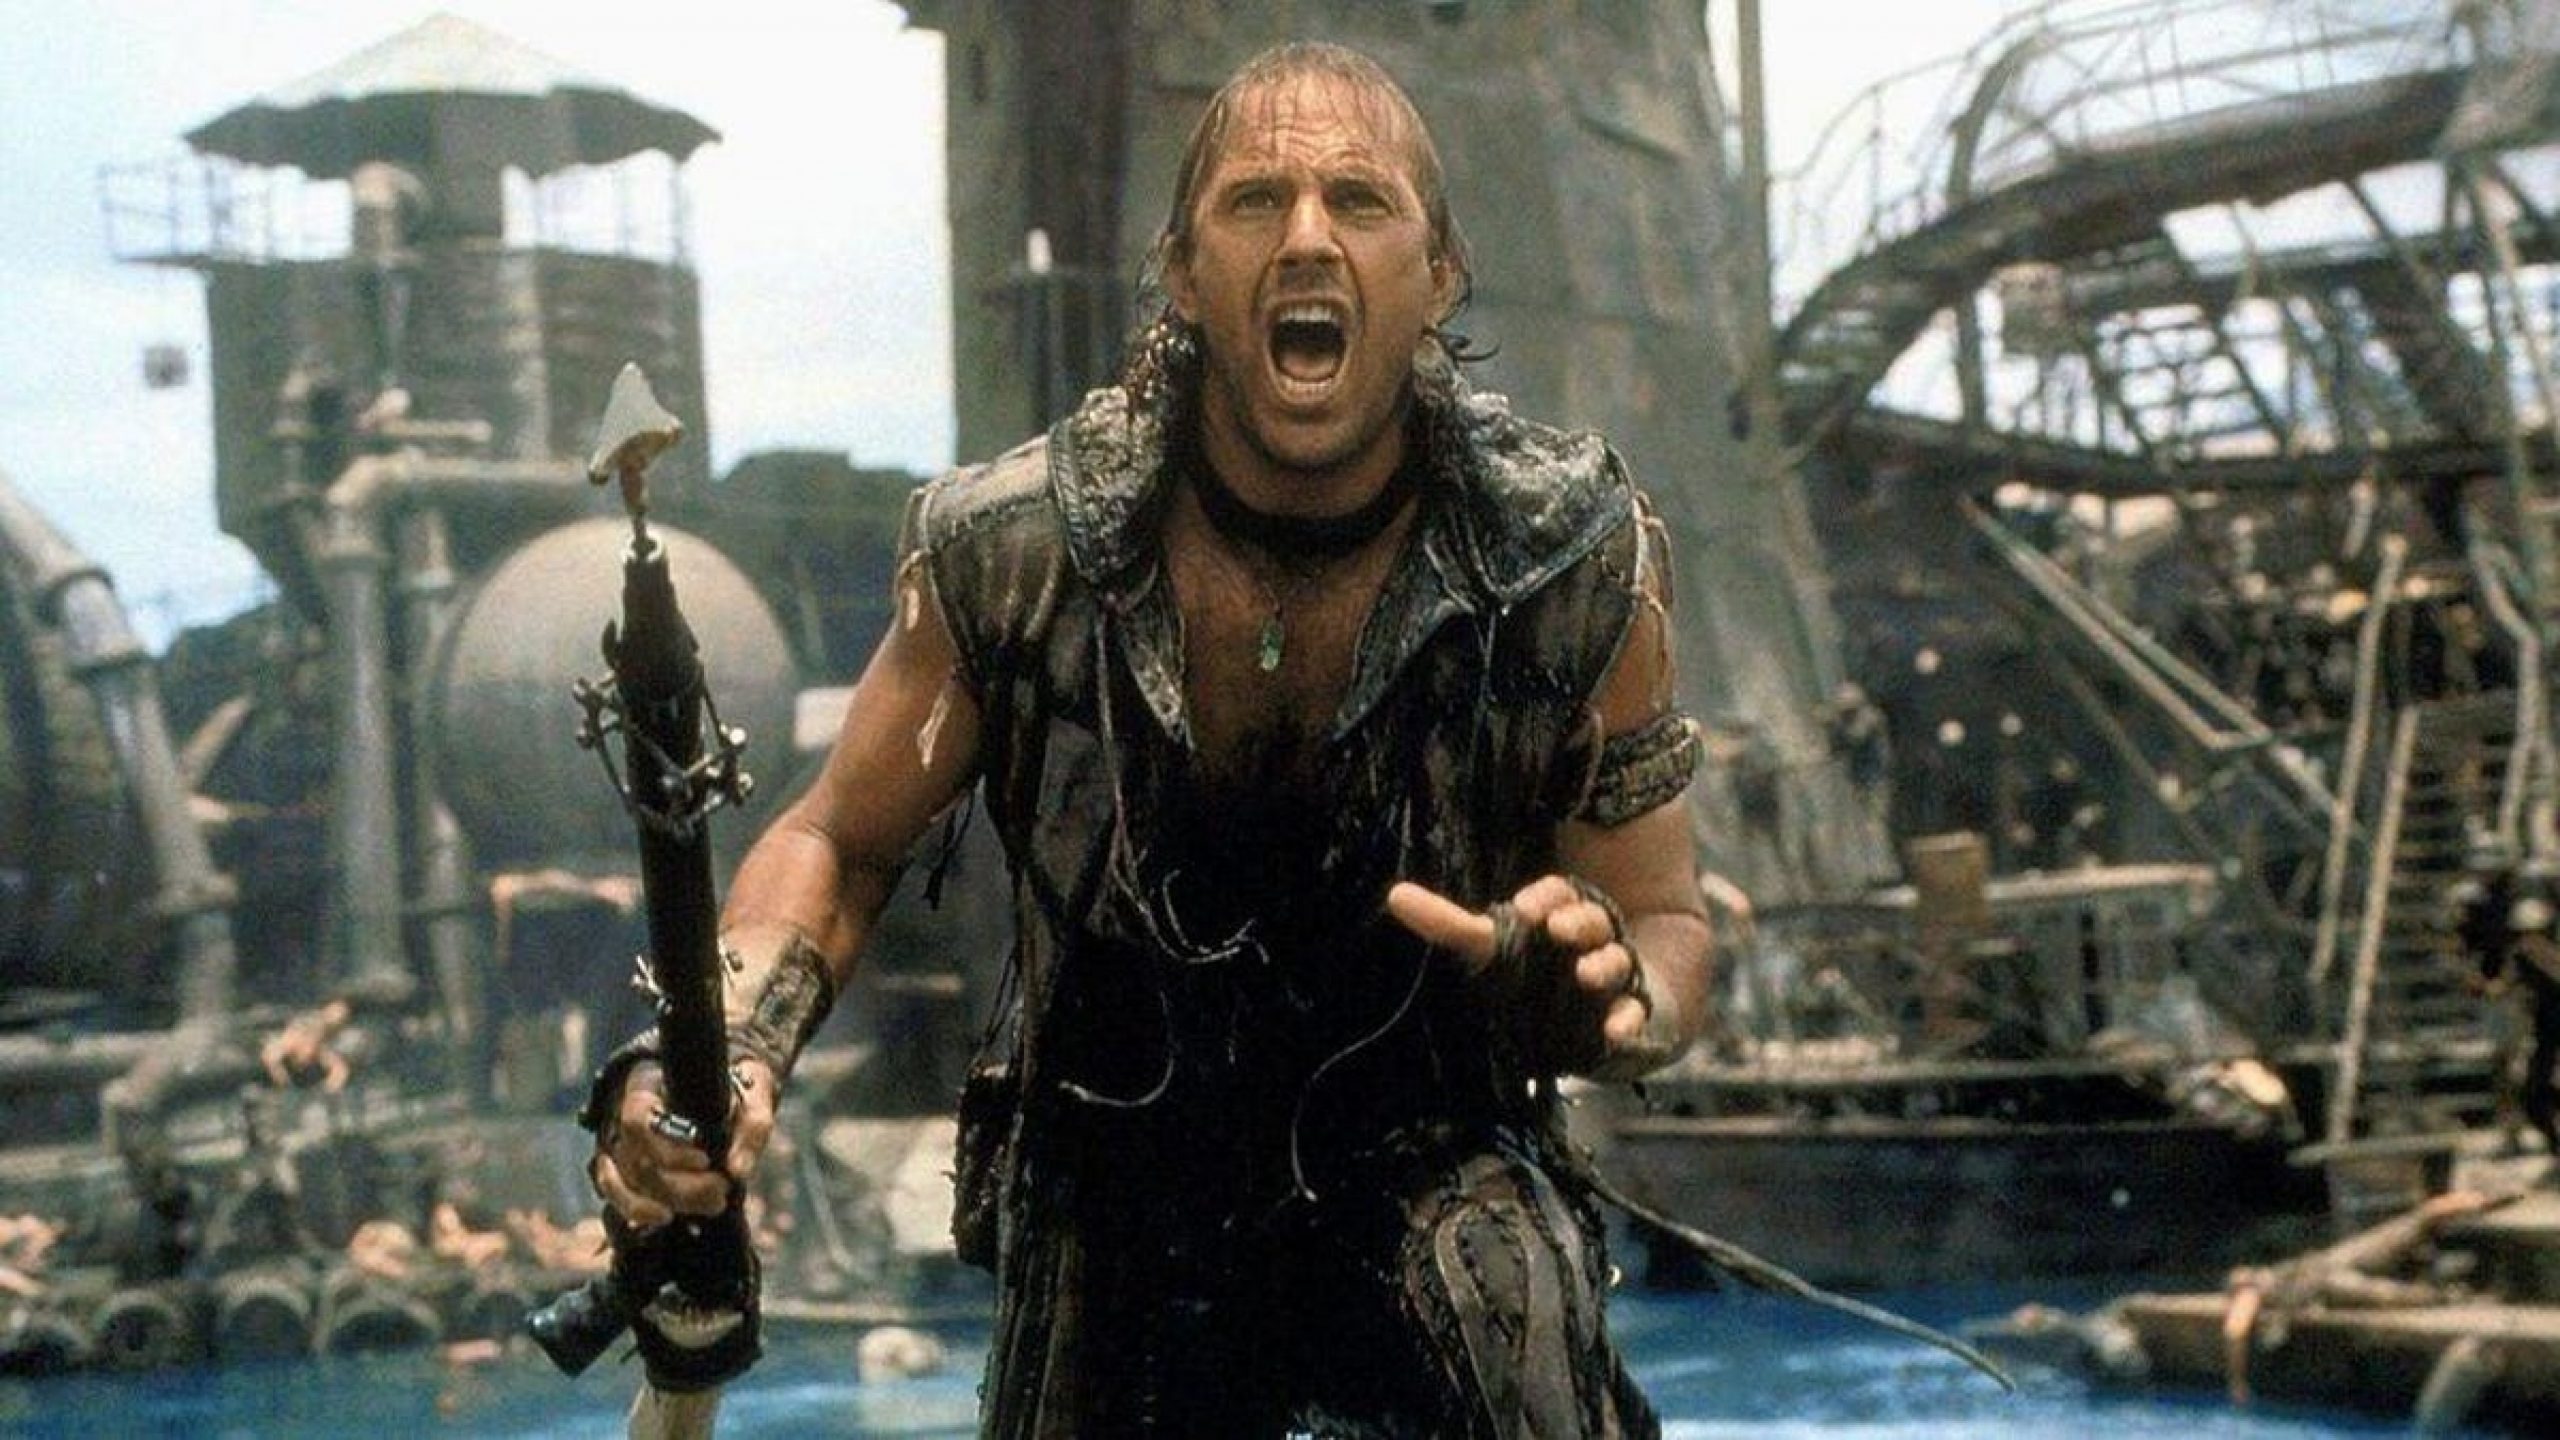 A Waterworld TV Show Is in the Works